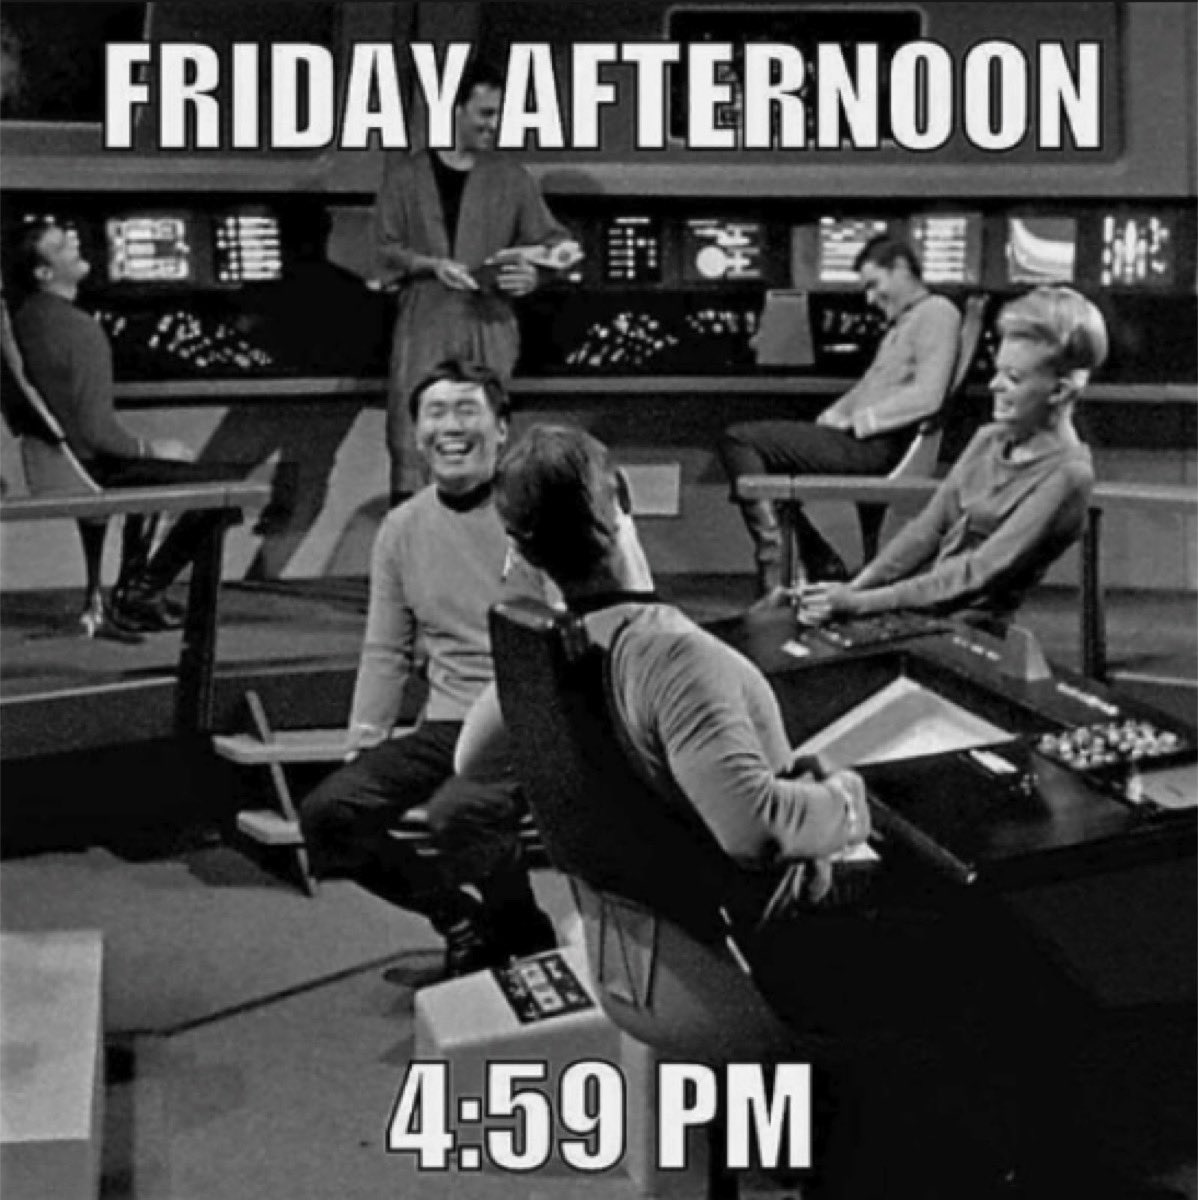 No one accused Friday of being the most productive! #roddenberry #weekend #fridaymorning #StarTrek